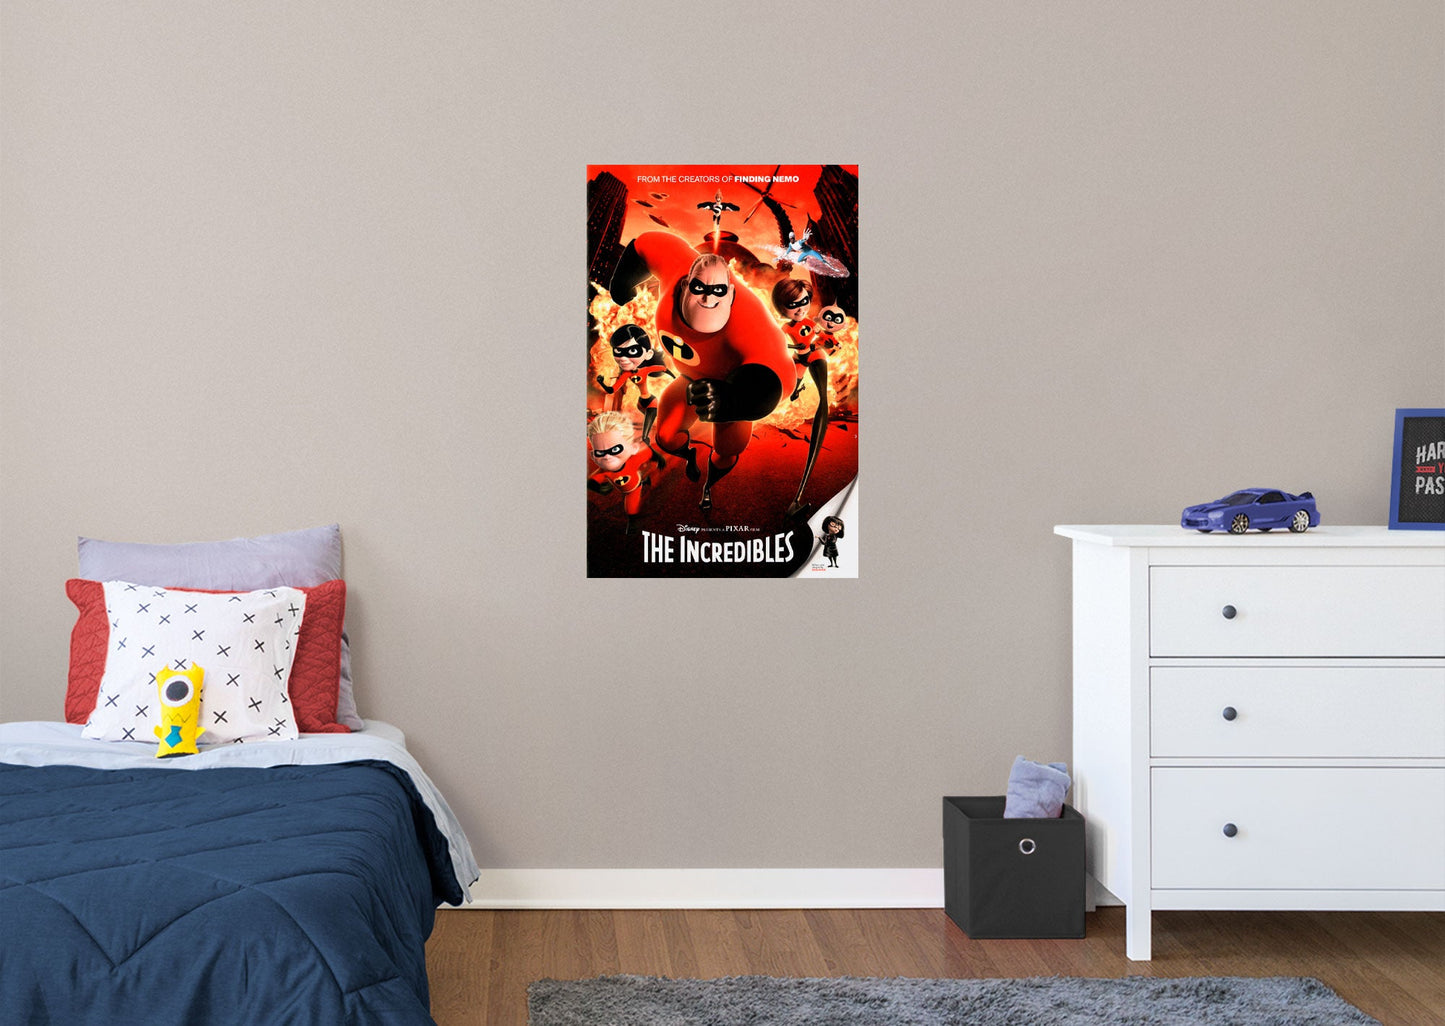 The Incredibles:  Movie Poster Mural        - Officially Licensed Disney Removable Wall   Adhesive Decal